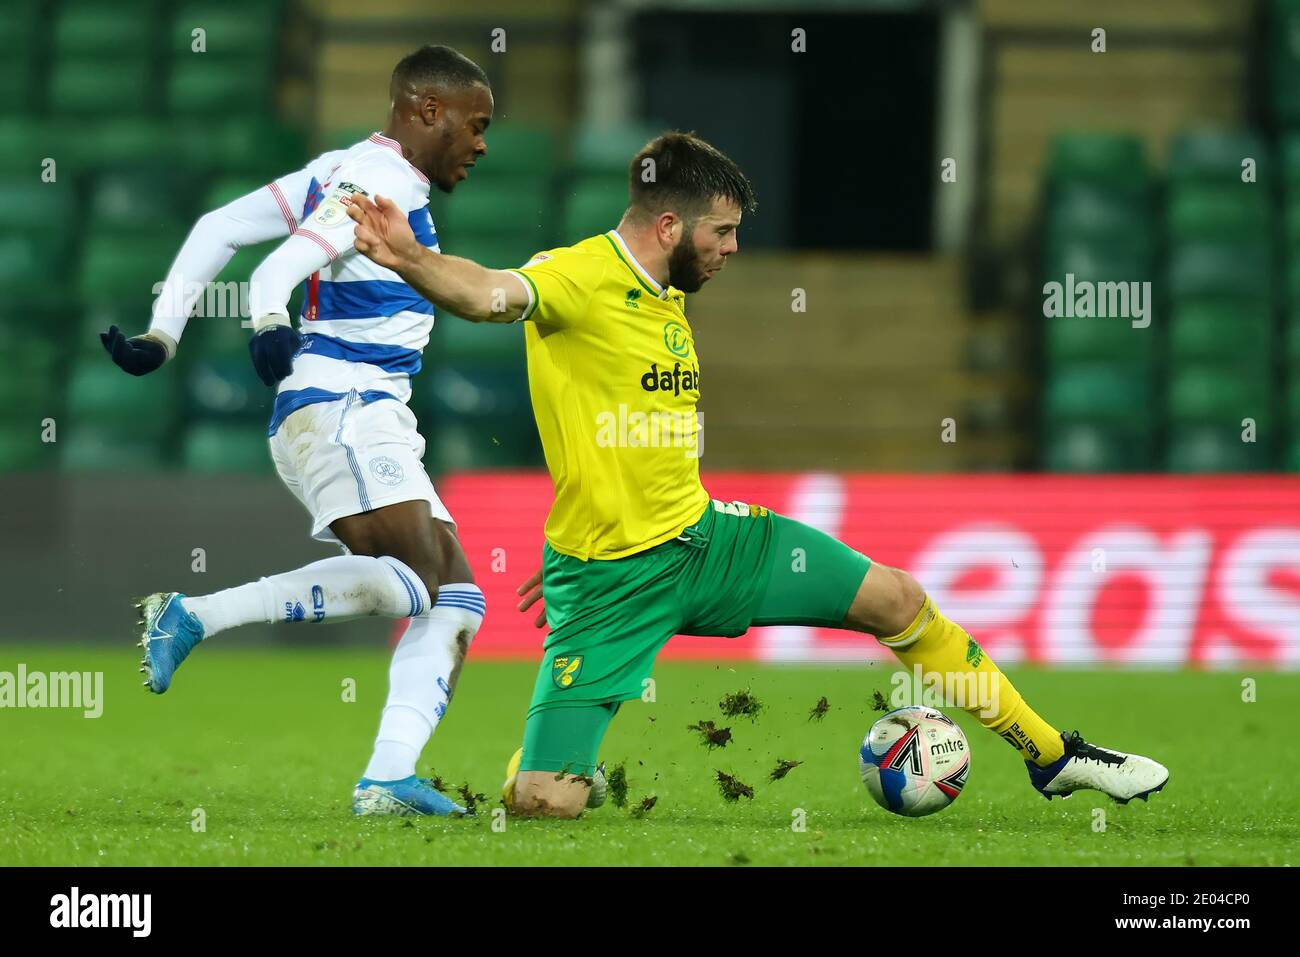 Norwich, Norfolk, UK. 29th December 2020; Carrow Road, Norwich, Norfolk, England, English Football League Championship Football, Norwich versus Queens Park Rangers; Grant Hanley of Norwich City miscontrols the ball Credit: Action Plus Sports Images/Alamy Live News Stock Photo